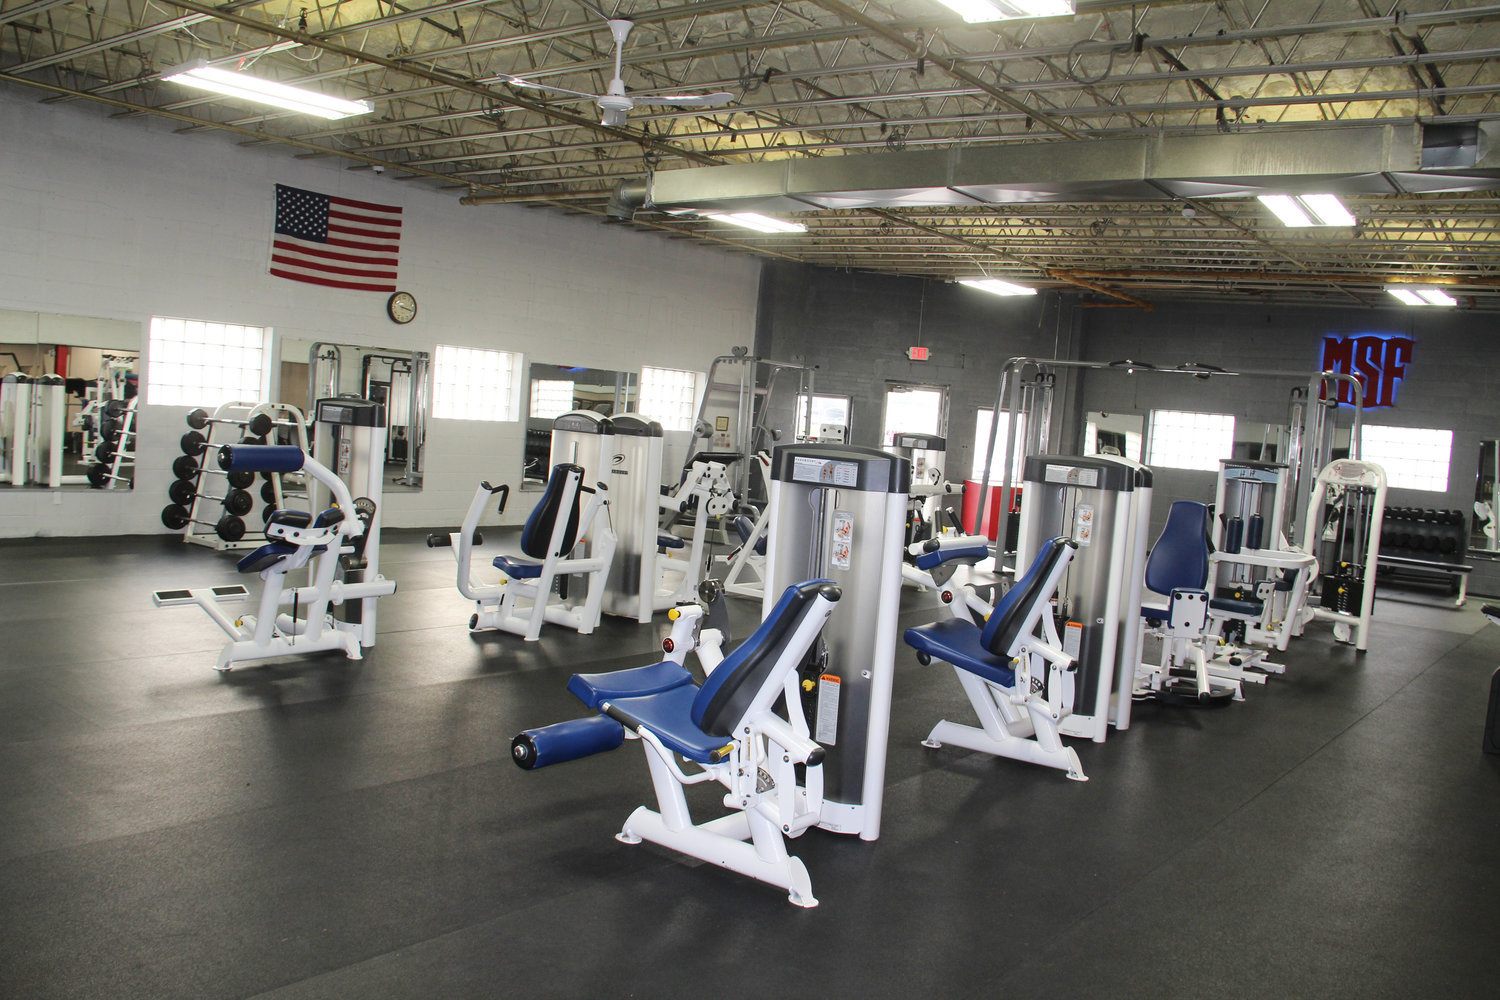 New workout equipment lines the main room at Mexico Strength and Fitness, where Ledger employees once worked.